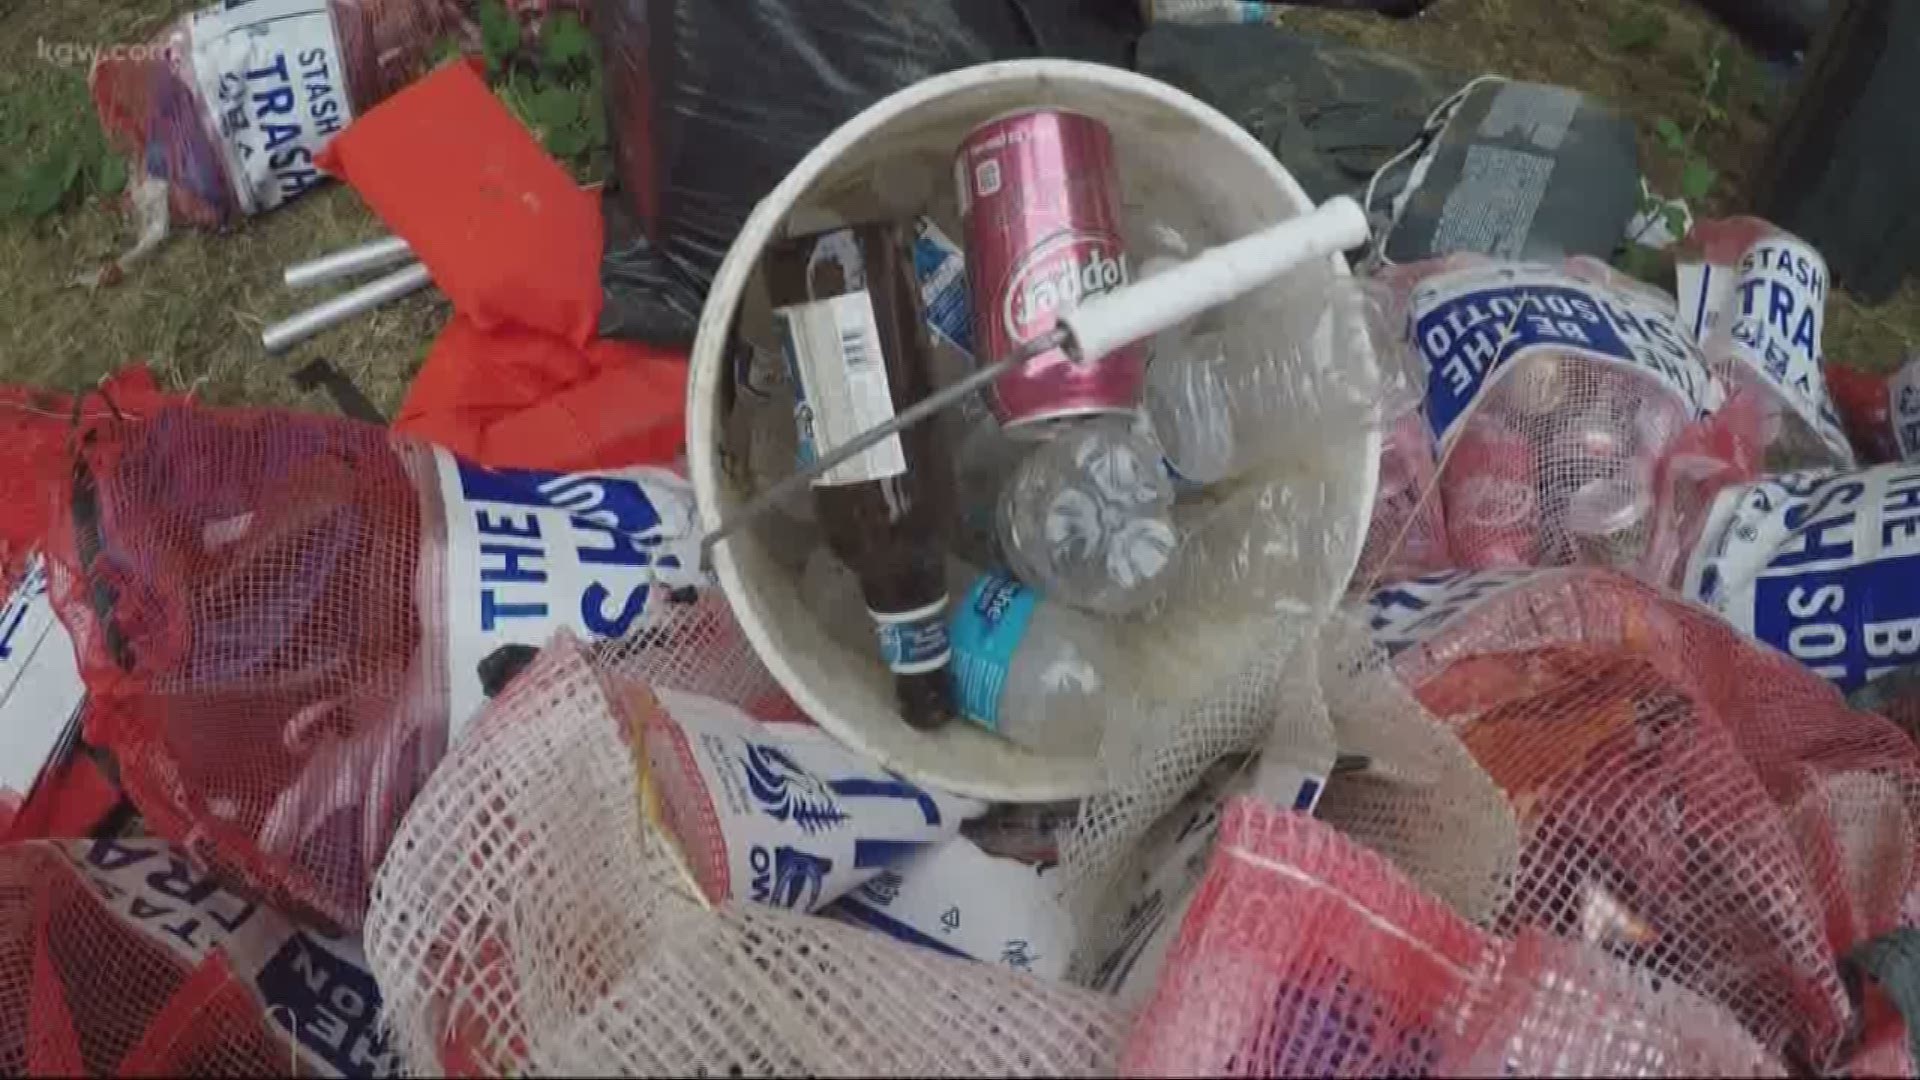 Hot weather has made it a busy year at local rivers. Authorities say that's lead to people dumping tons of trash into the Clackamas River.